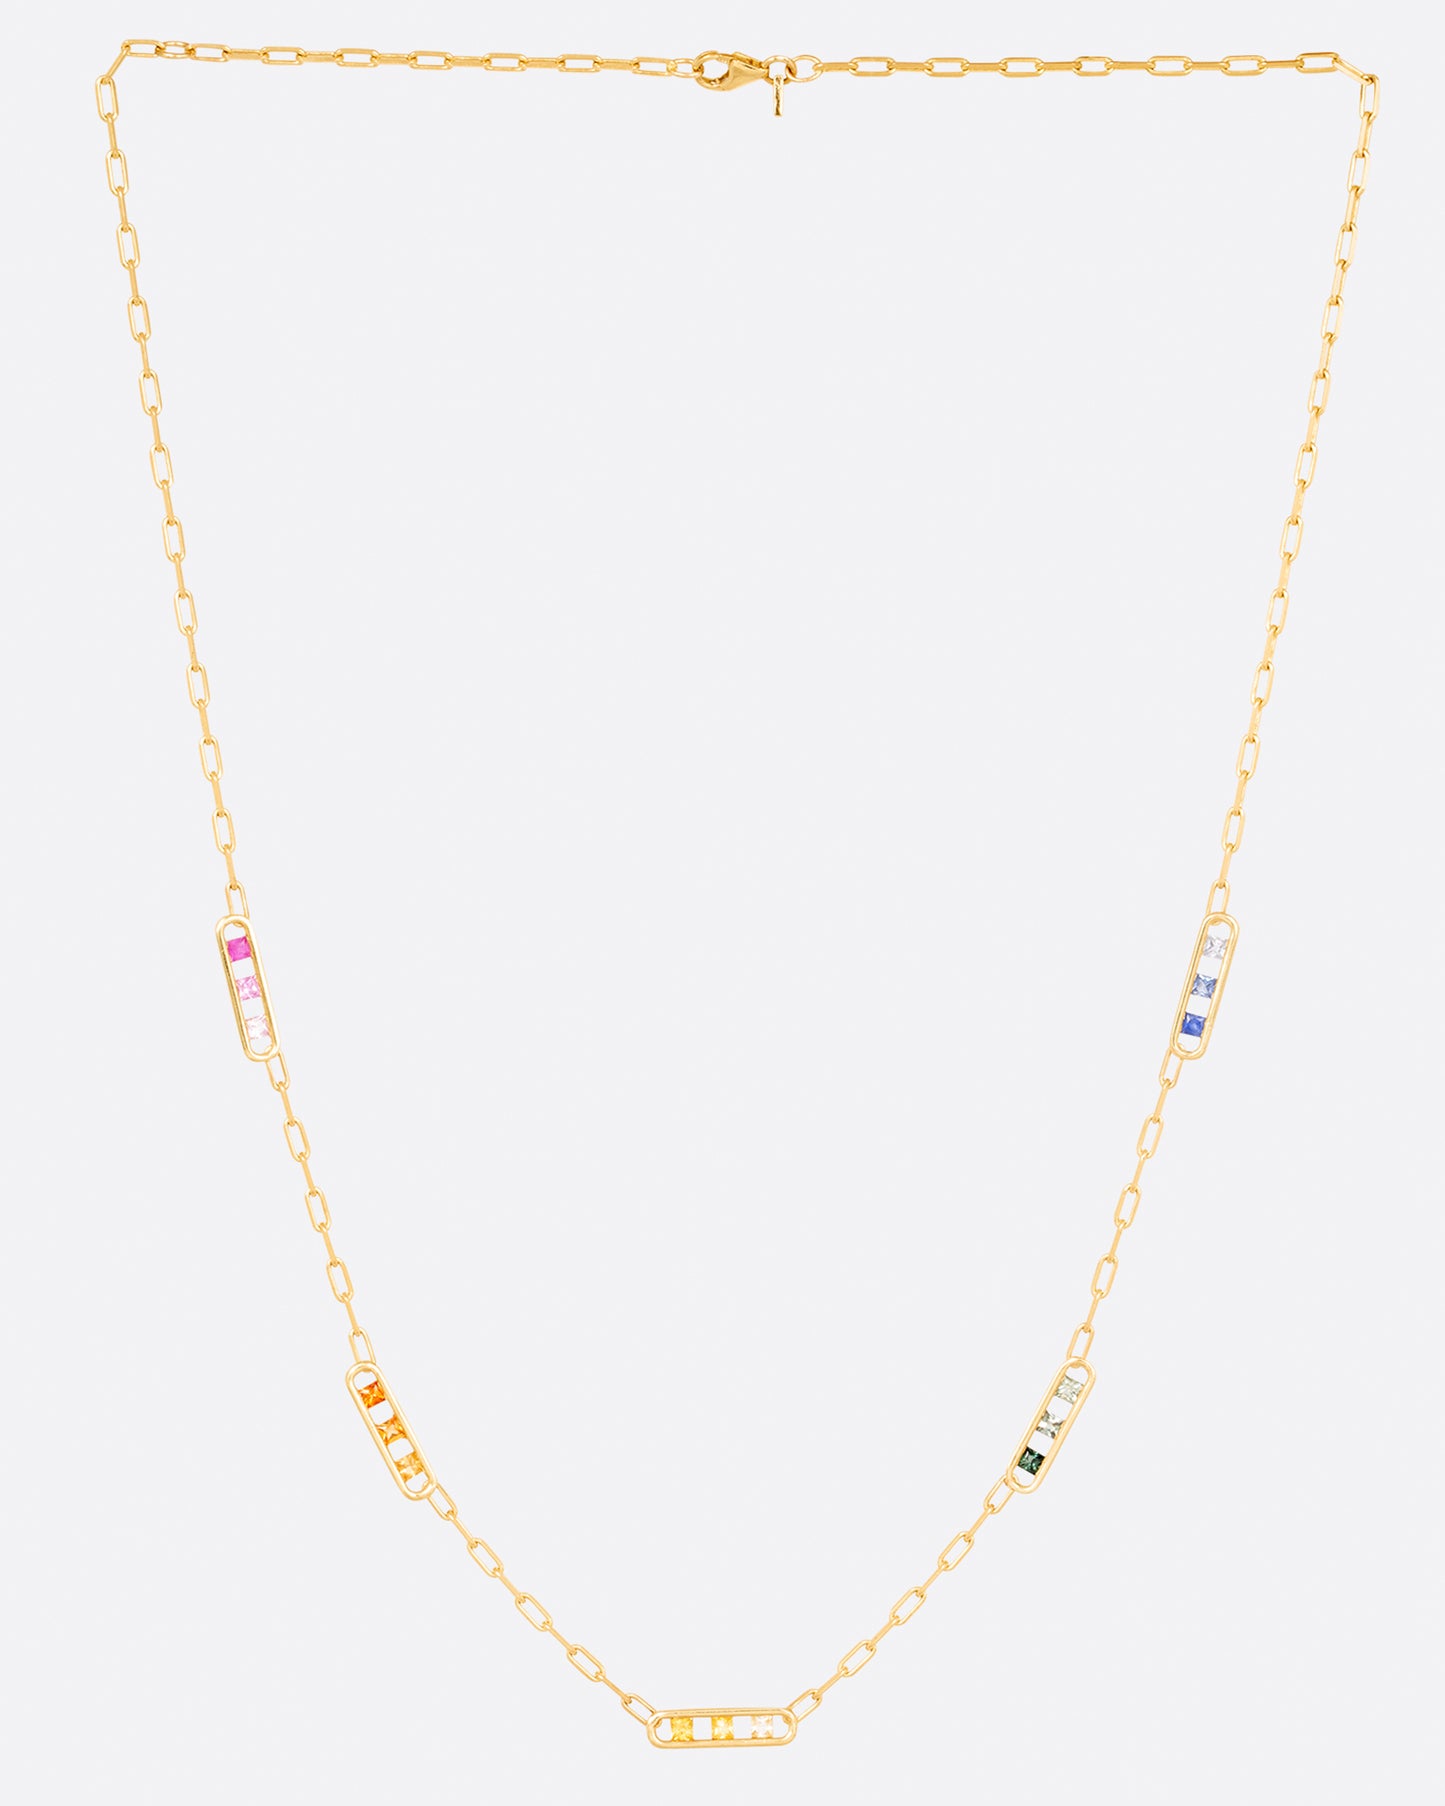 A yellow gold chain necklace with five stations containing princess cut rainbow sapphires, shown hanging.